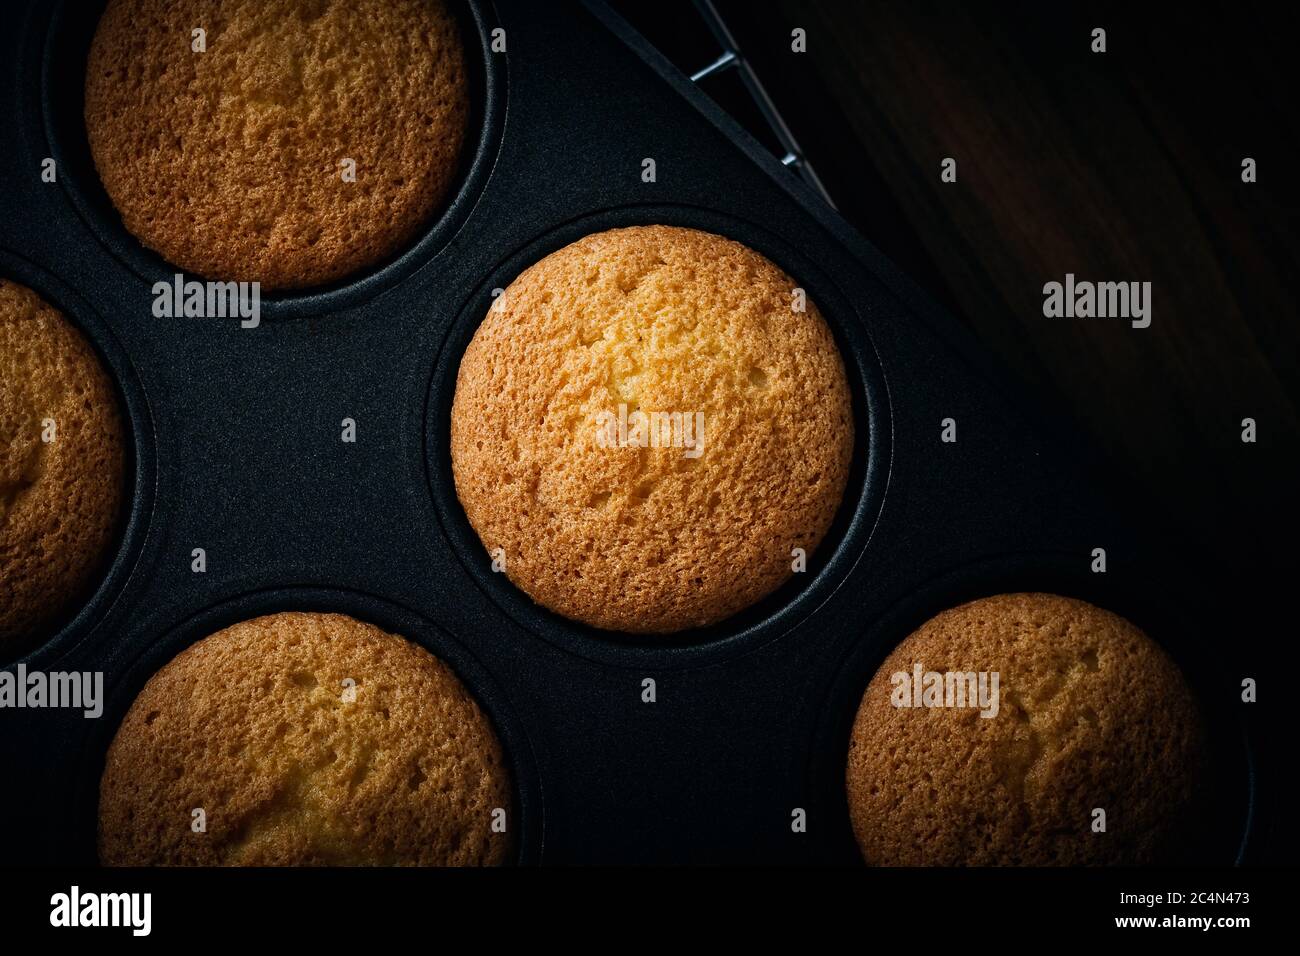 Plain fairy cakes inside a baking tray waiting to be decorated Stock Photo